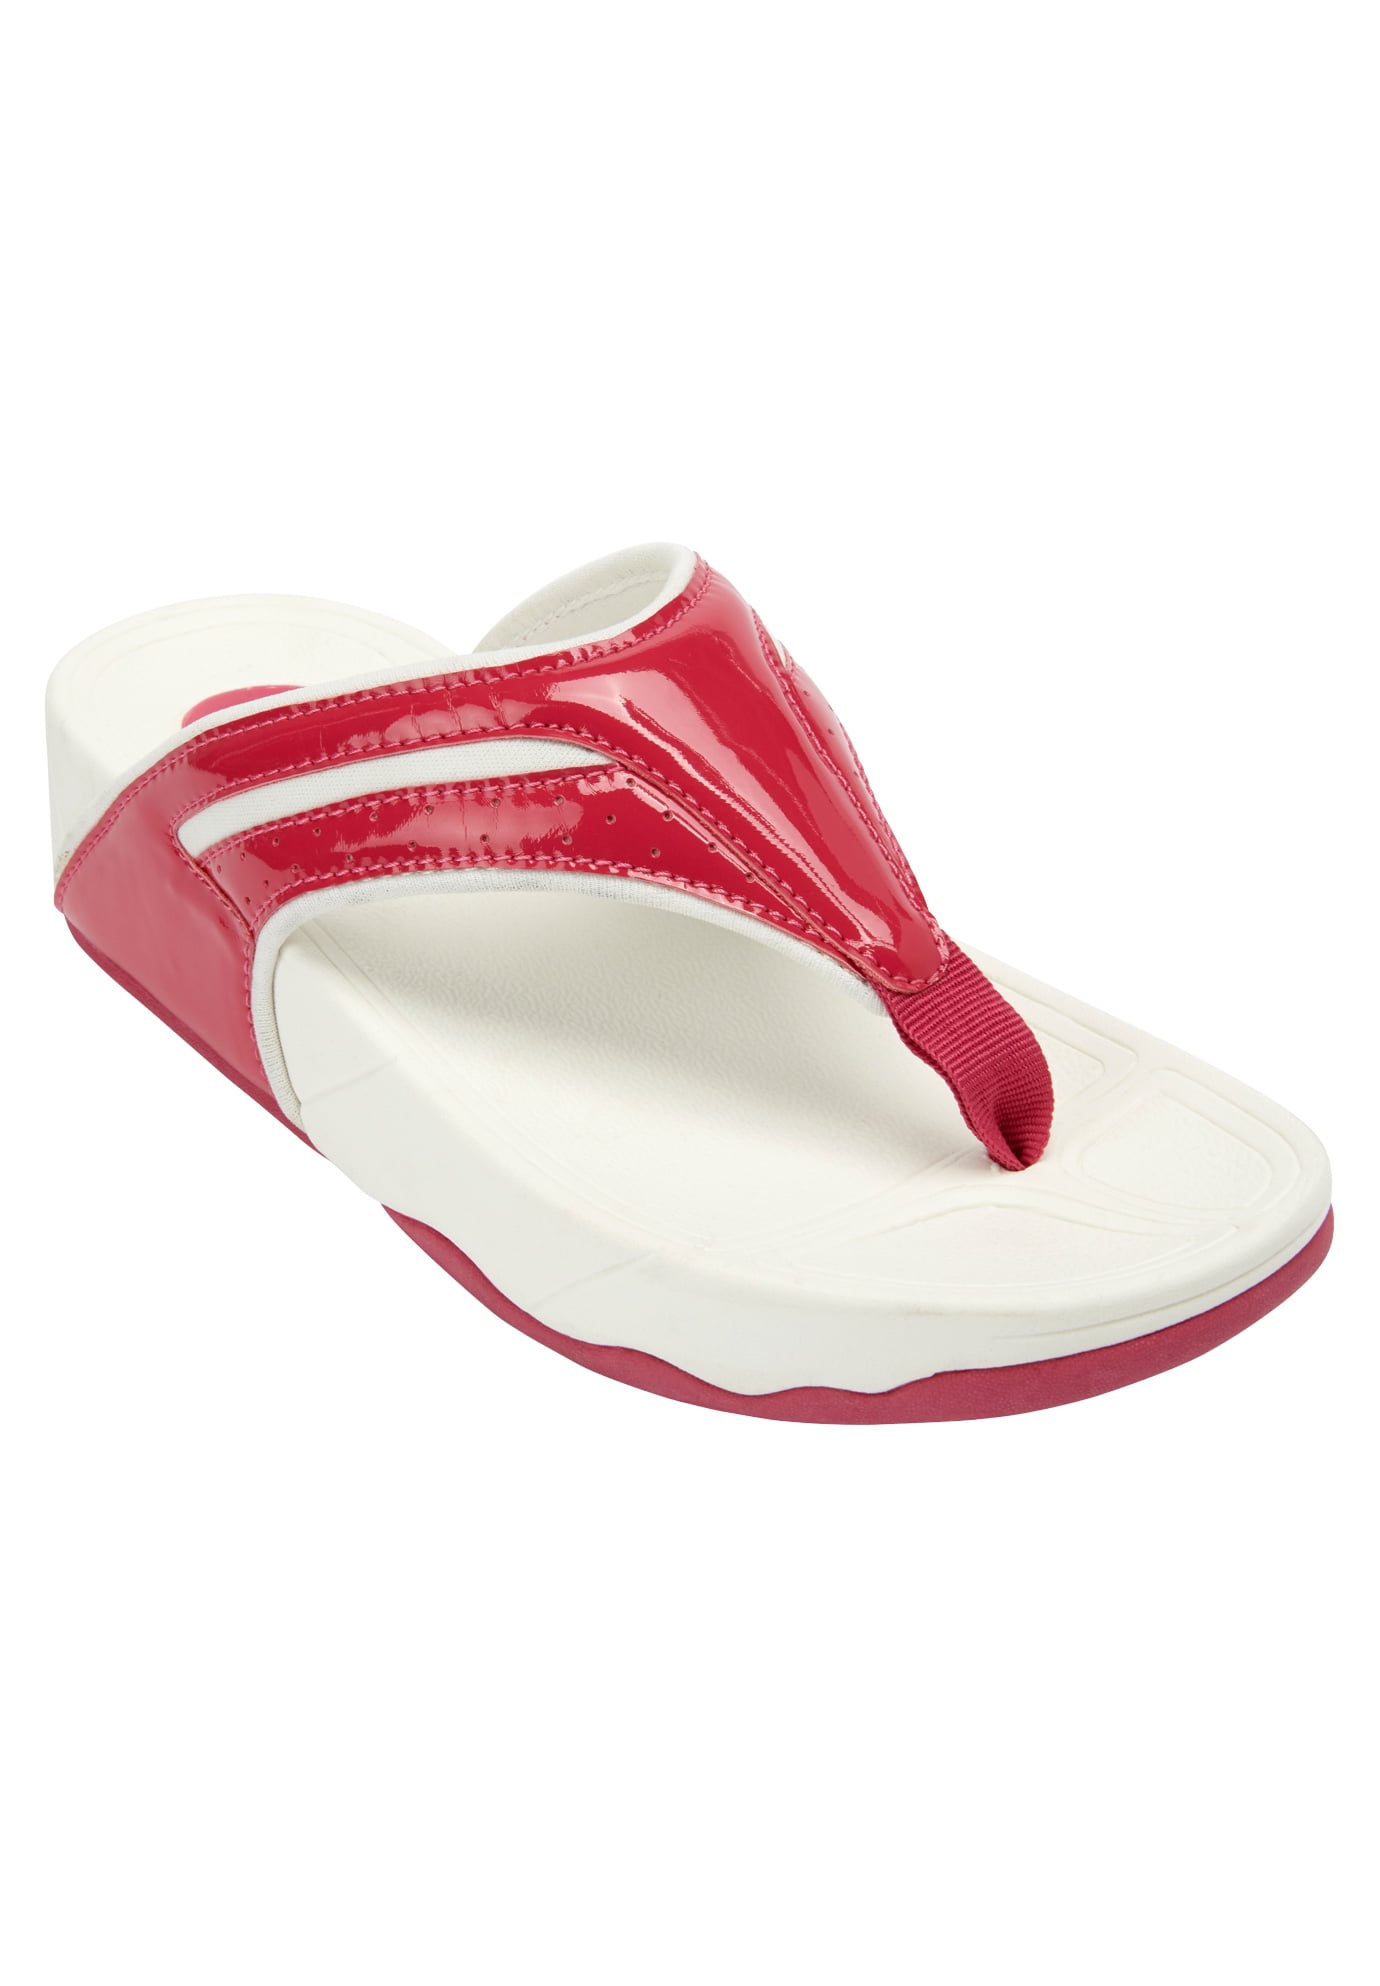 Comfortview - Comfortview Women's Wide Width The Sporty Thong Sandal ...